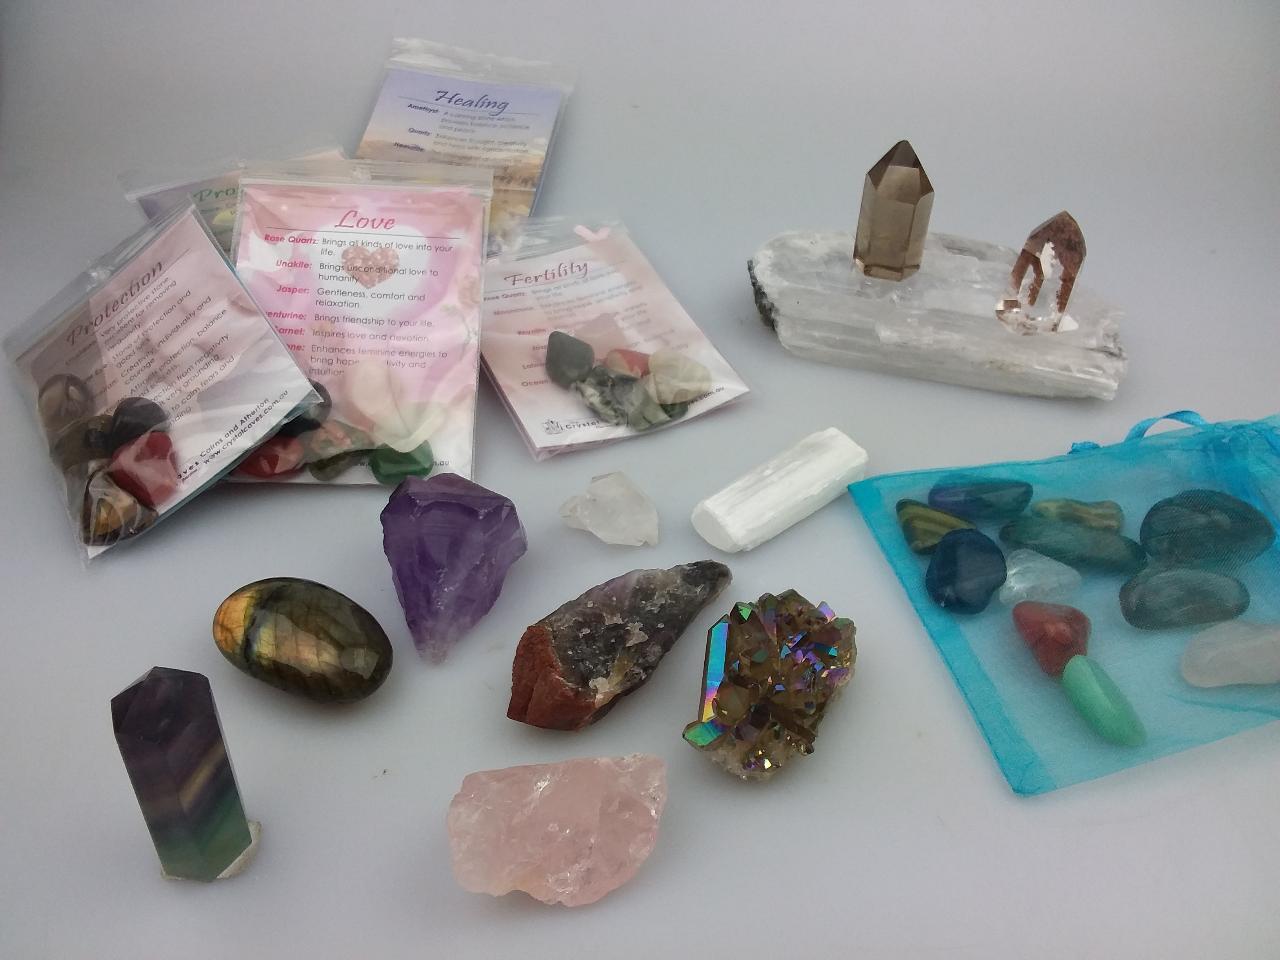 Wake up to Crystals Workshop